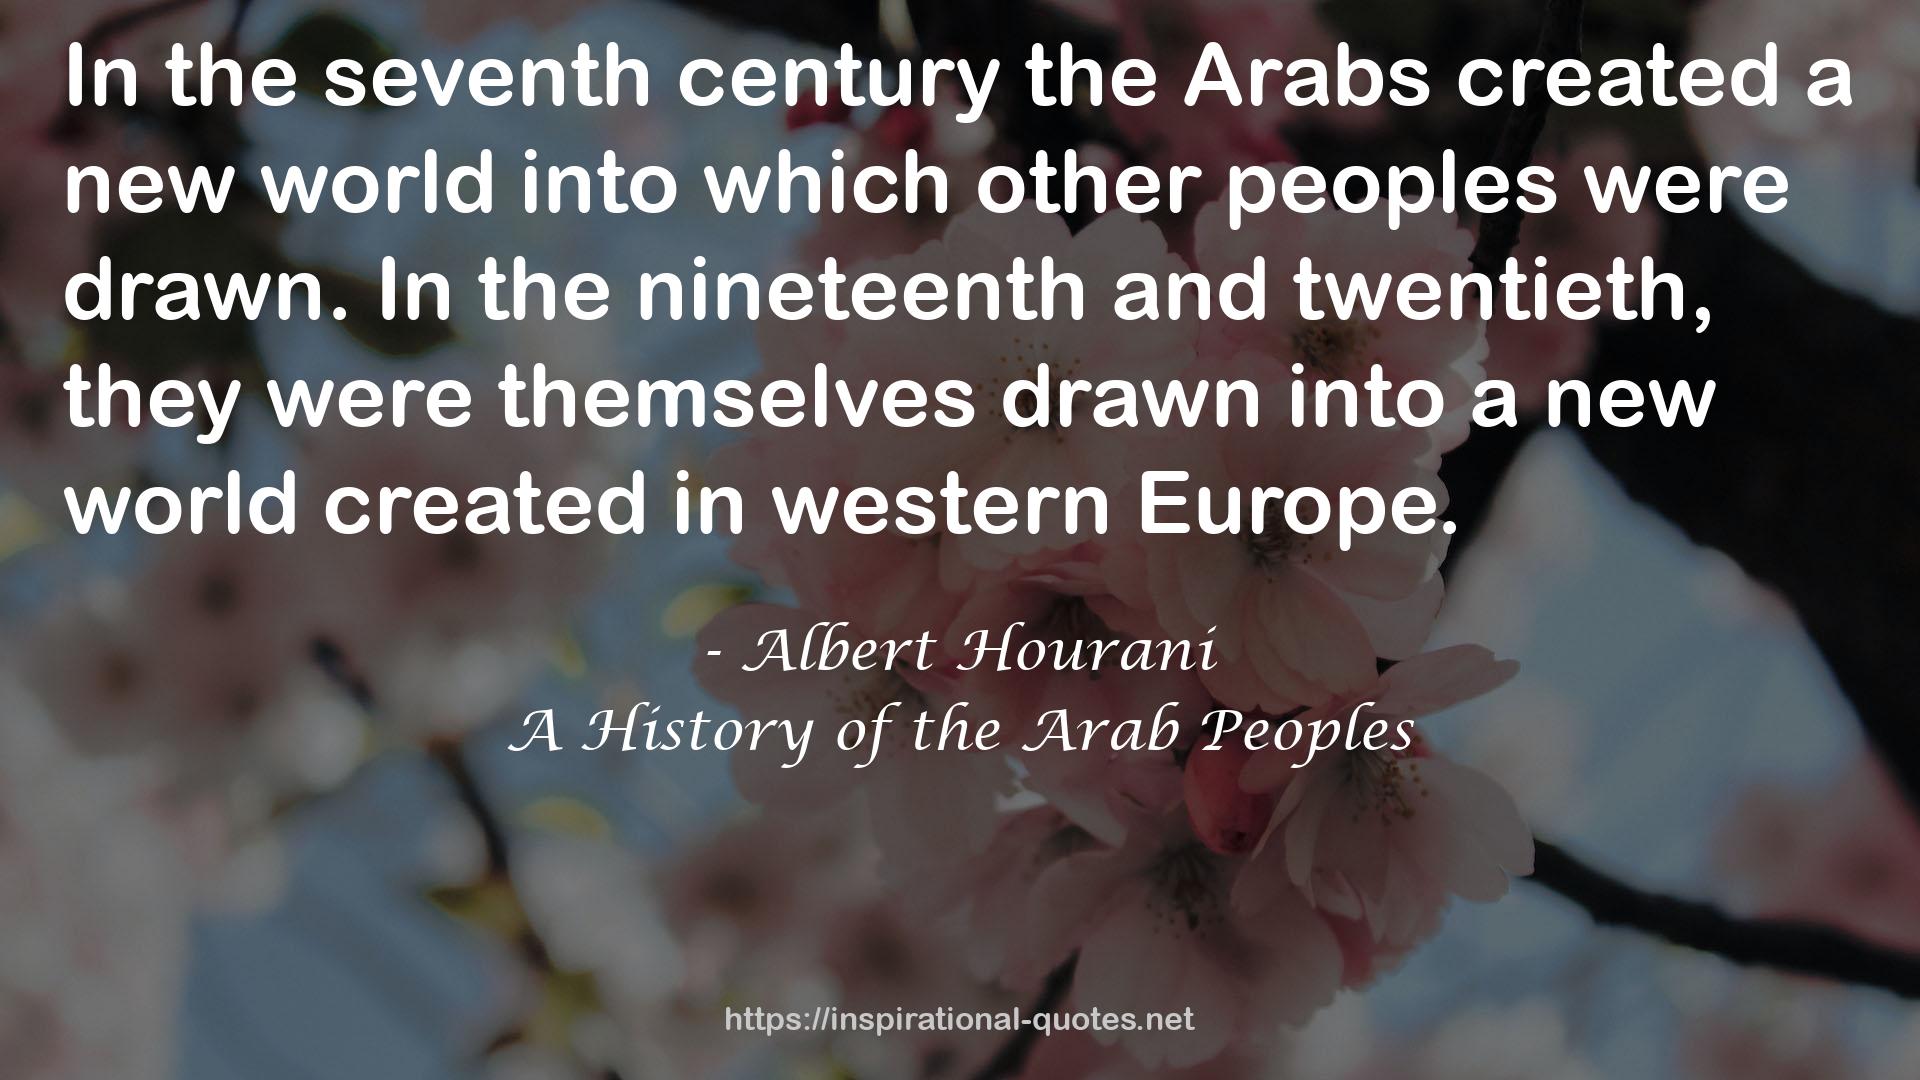 A History of the Arab Peoples QUOTES